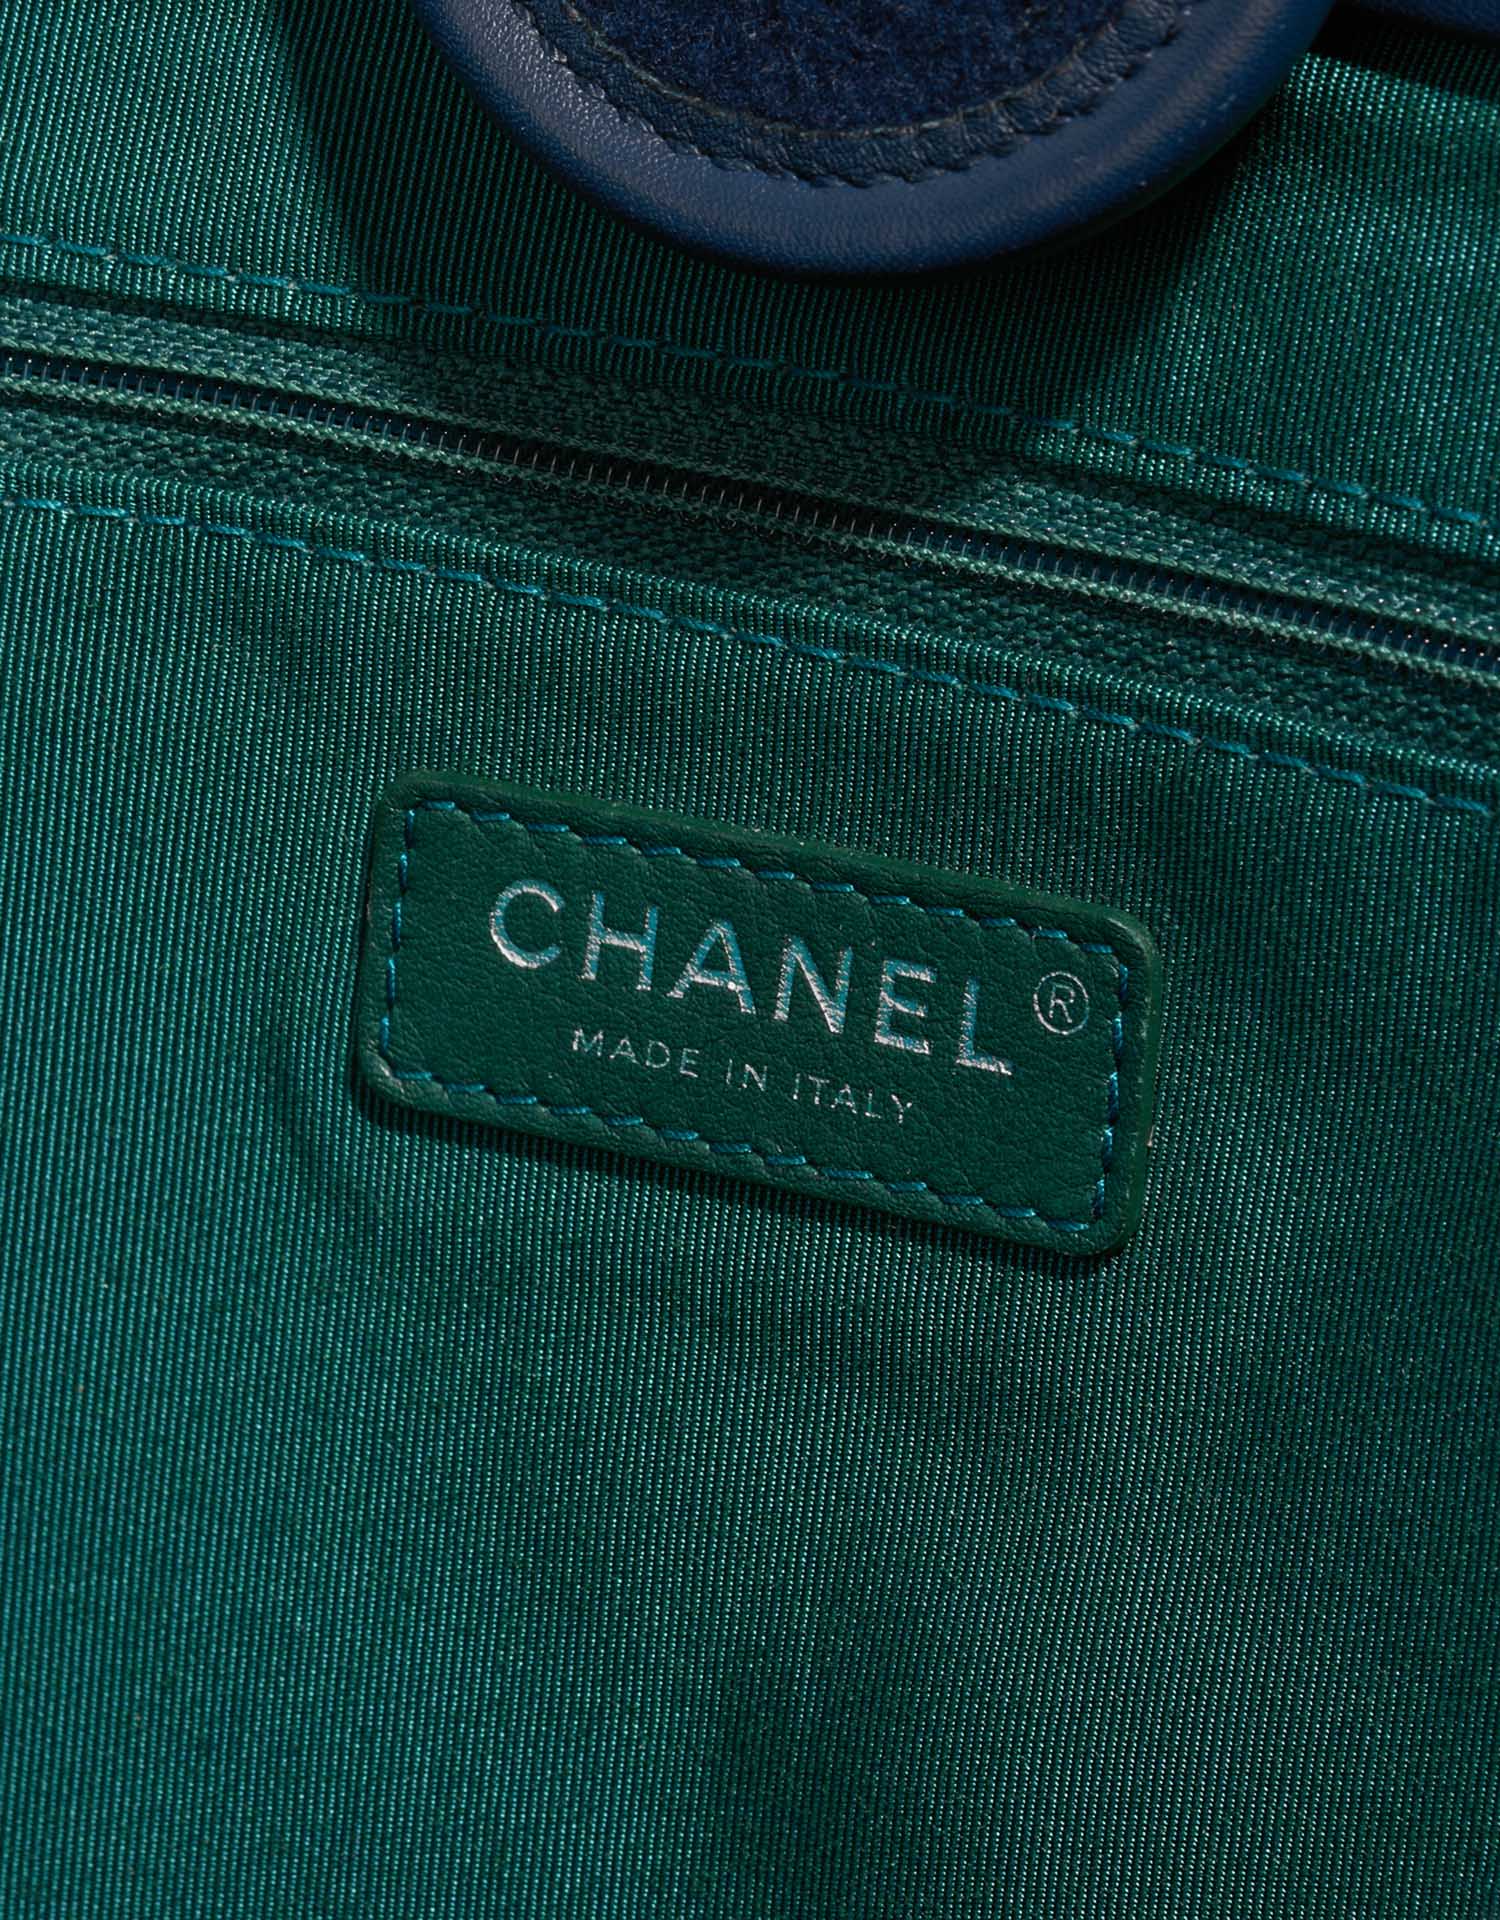 Pre-owned Chanel bag Deauville Large Wool Blue / Turquoise Blue Logo | Sell your designer bag on Saclab.com